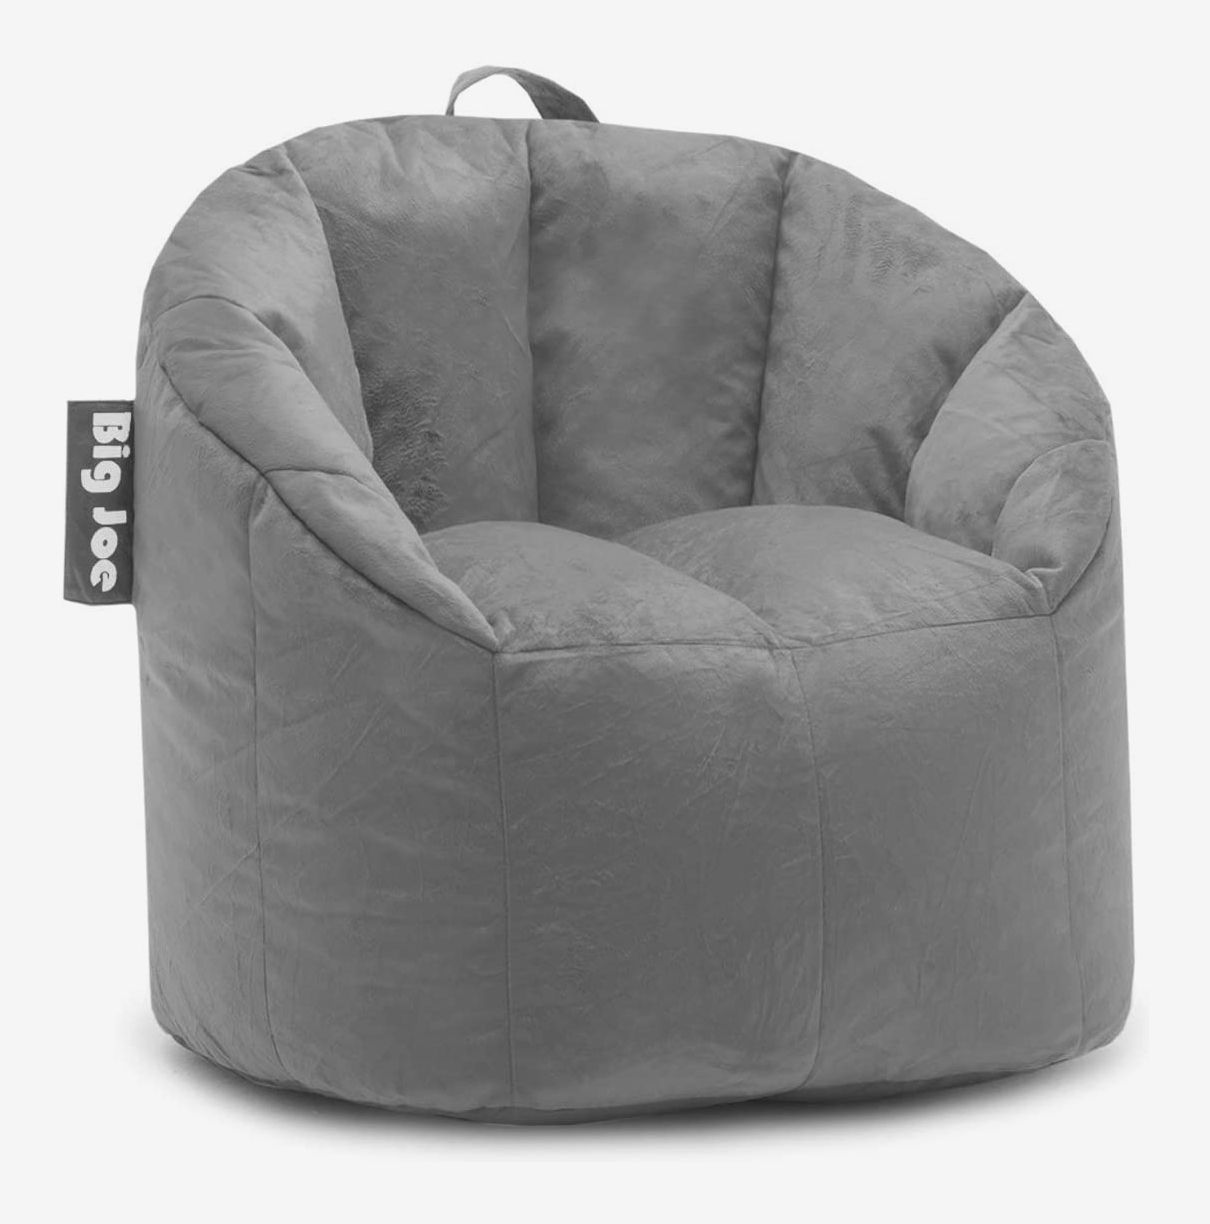 Big Joe Fuf Large Bean Bag Chair (Removeable Cover) - On Sale - Bed Bath &  Beyond - 28271879